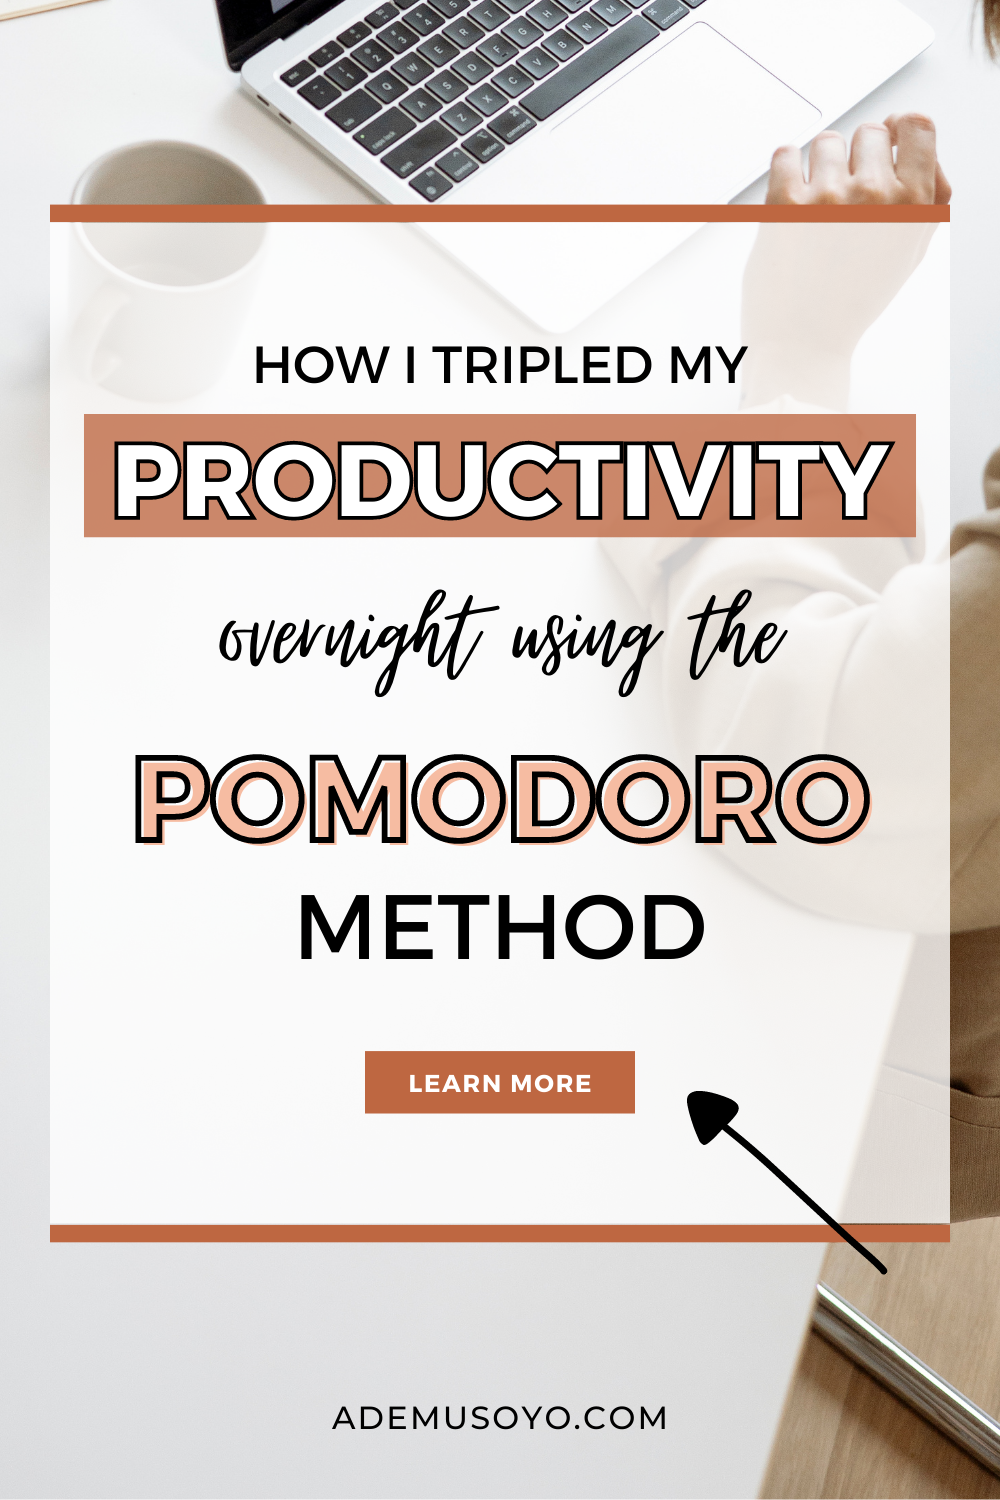 Say goodbye to procrastination. Implement the Pomodoro Technique for a threefold increase in productivity. Our step-by-step guide makes it easy to get started. Want to learn how? Check out this blog post about the Pomodoro Method to boost your productivity and master time management easily!